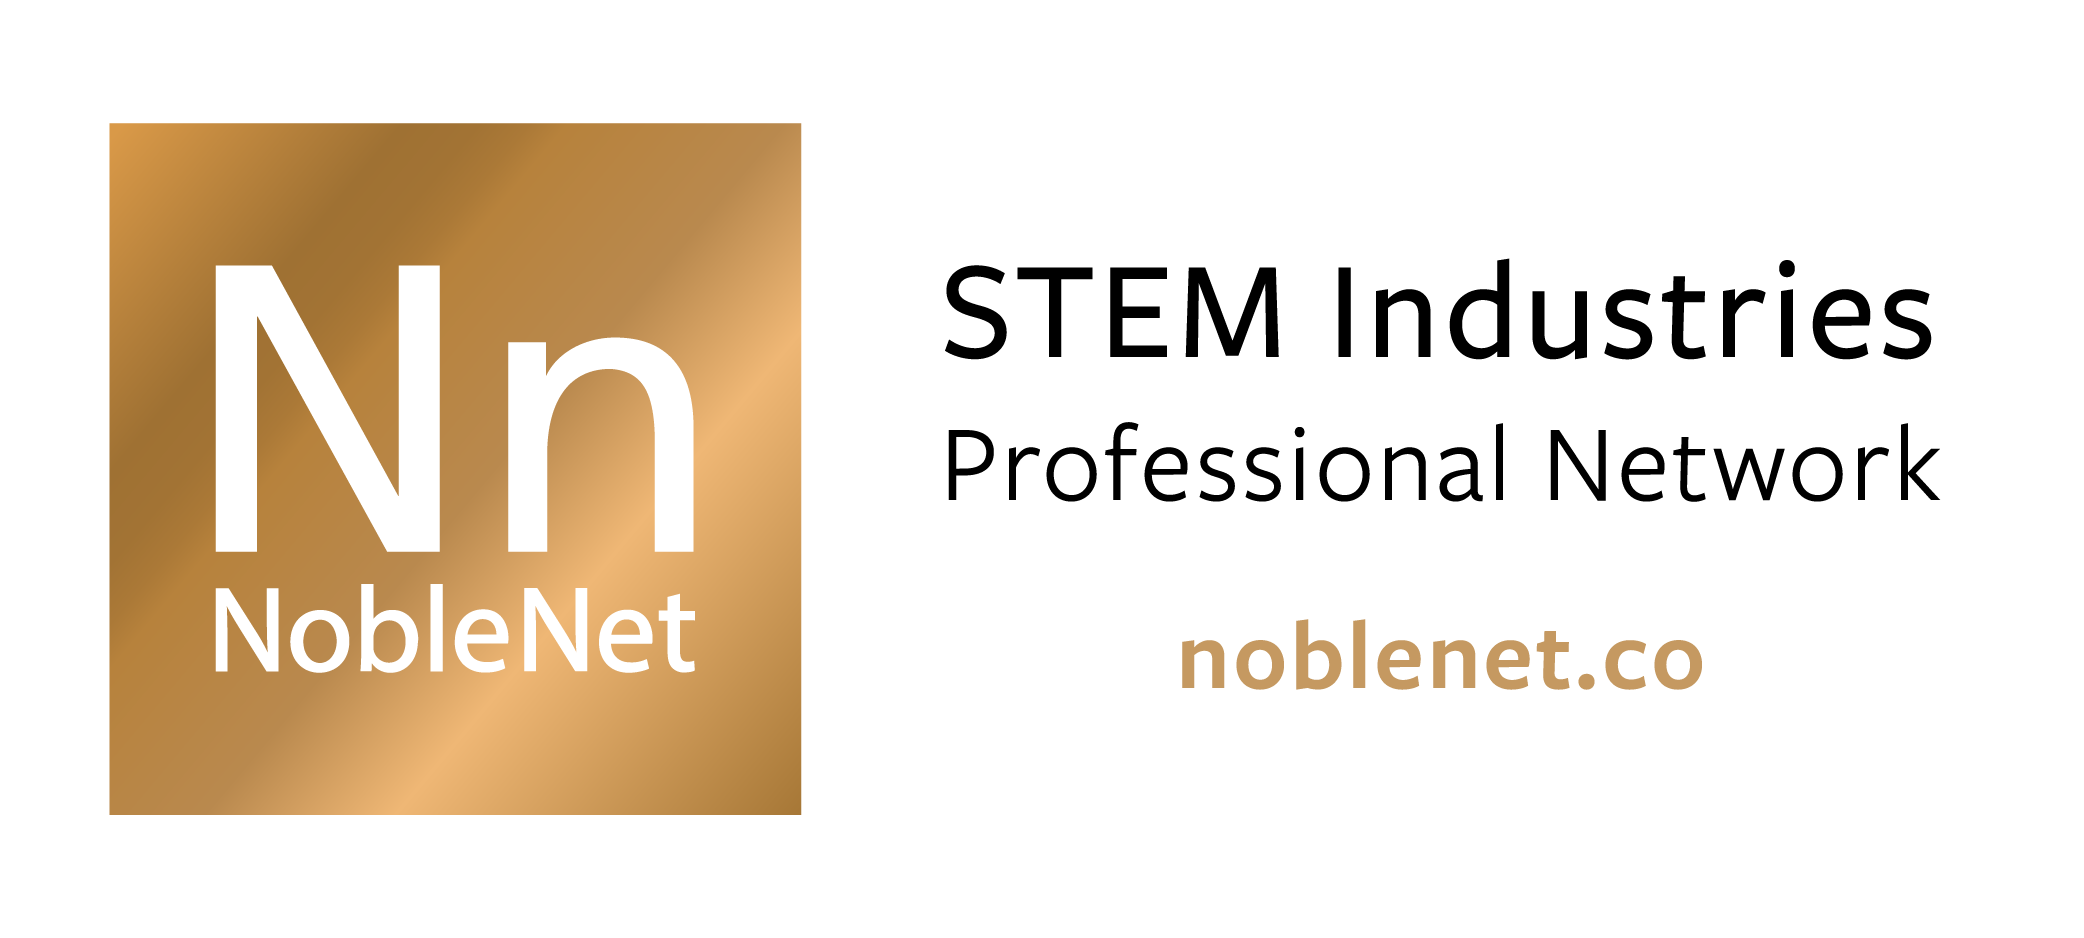 NN banner-rectangle.jpg To Use (2).png